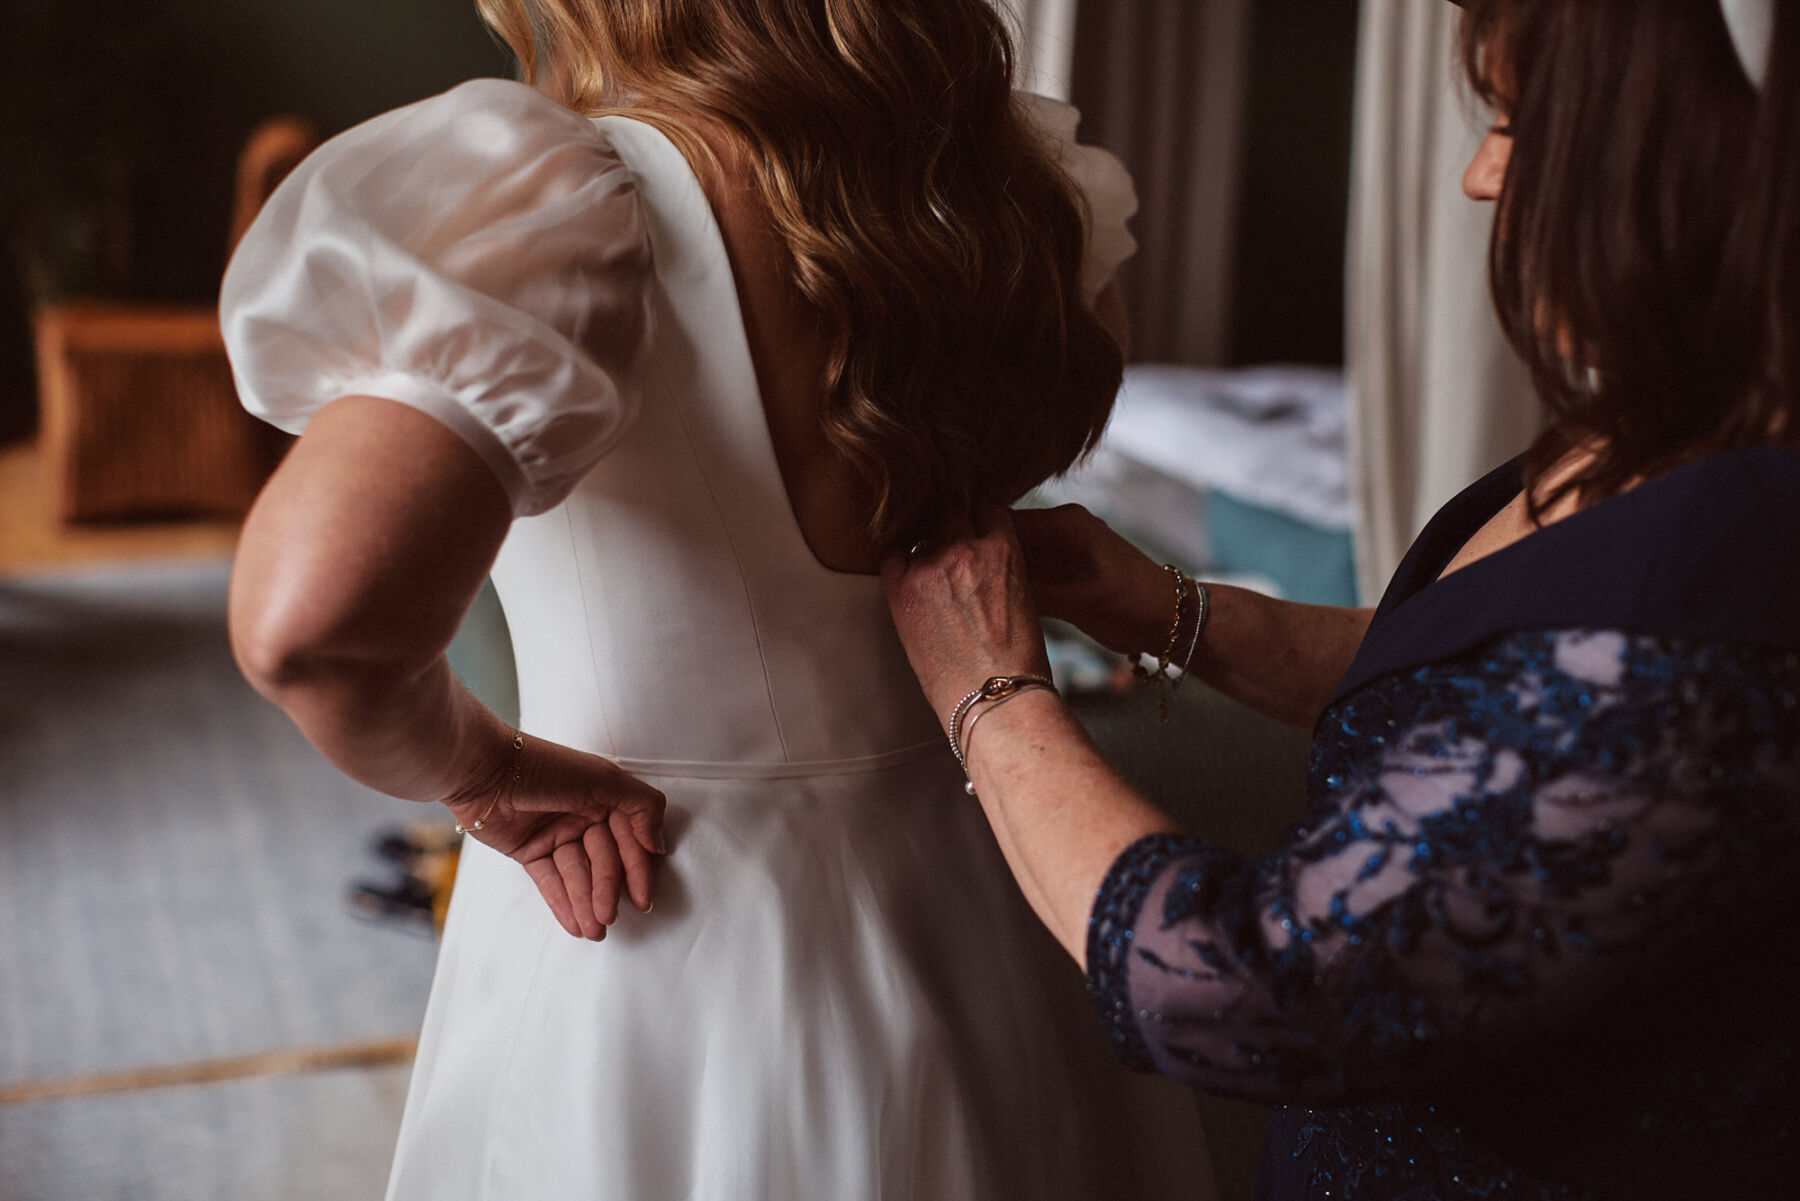 Mother of the bride buttoning her daughter into her Suzanne Neville wedding dress.